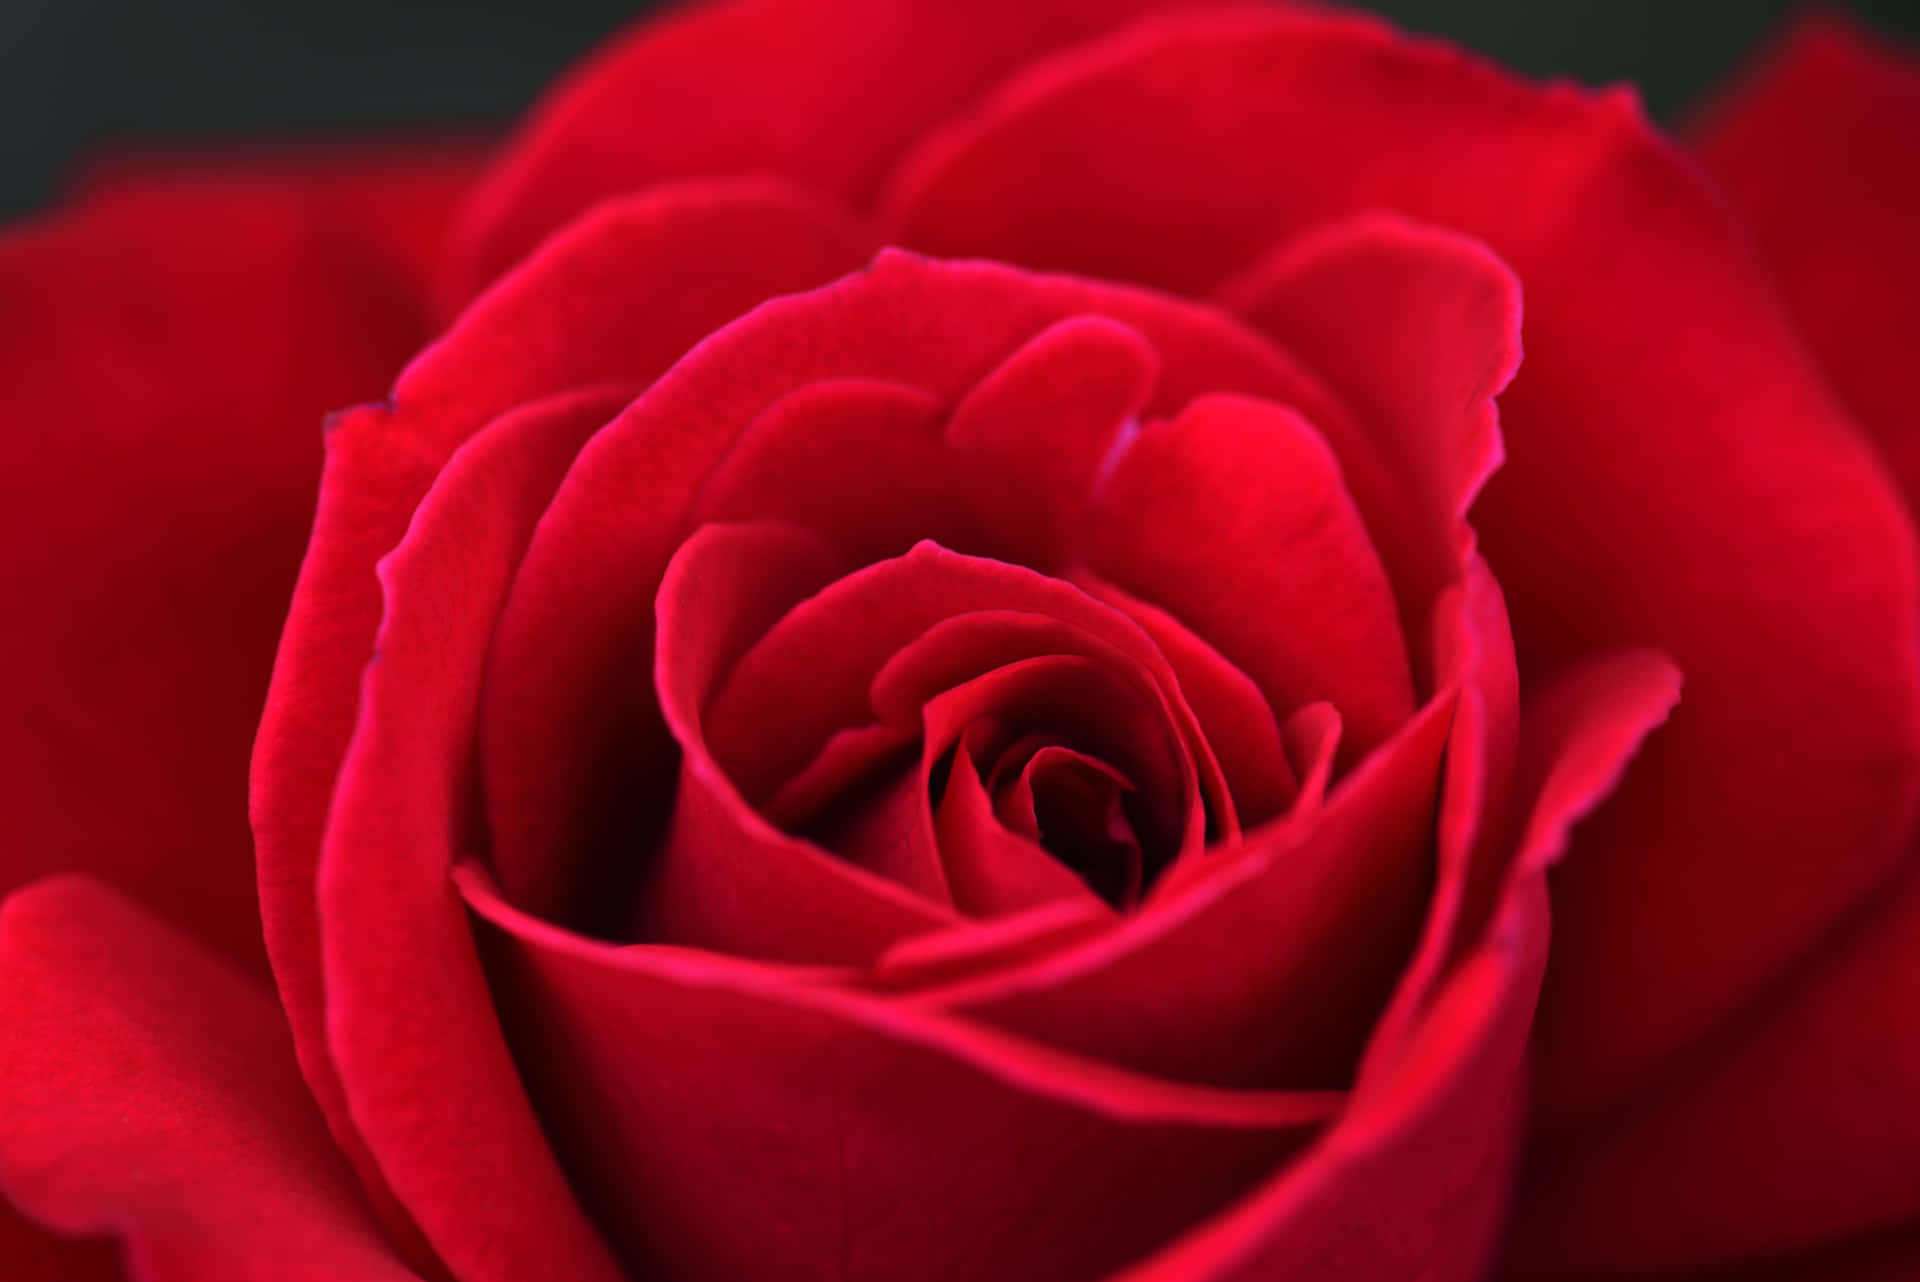 Celebrate Love with Red Roses